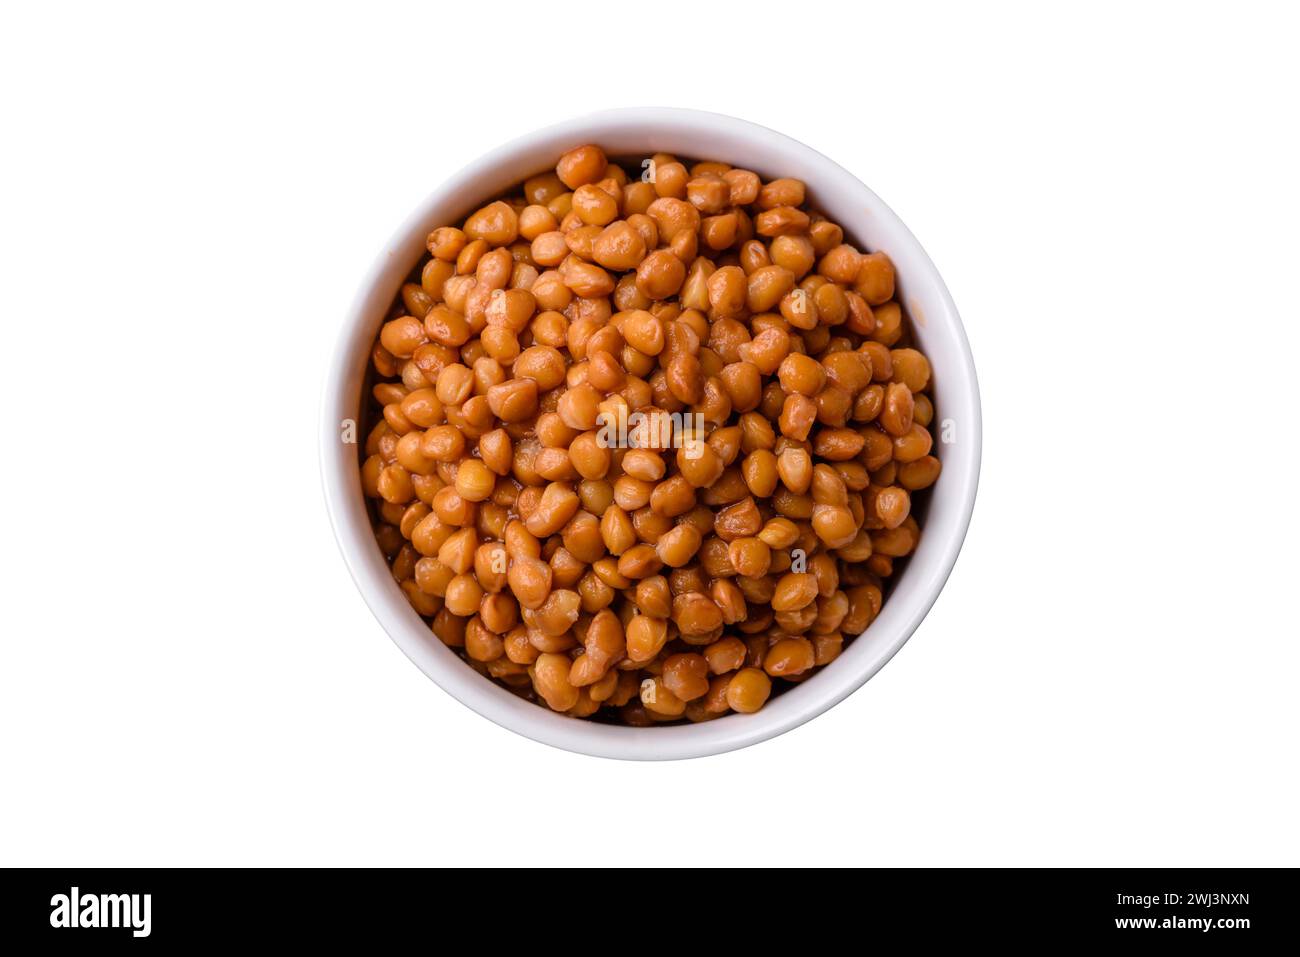 Delicious healthy canned lentils in a ceramic ribbed white bowl Stock Photo